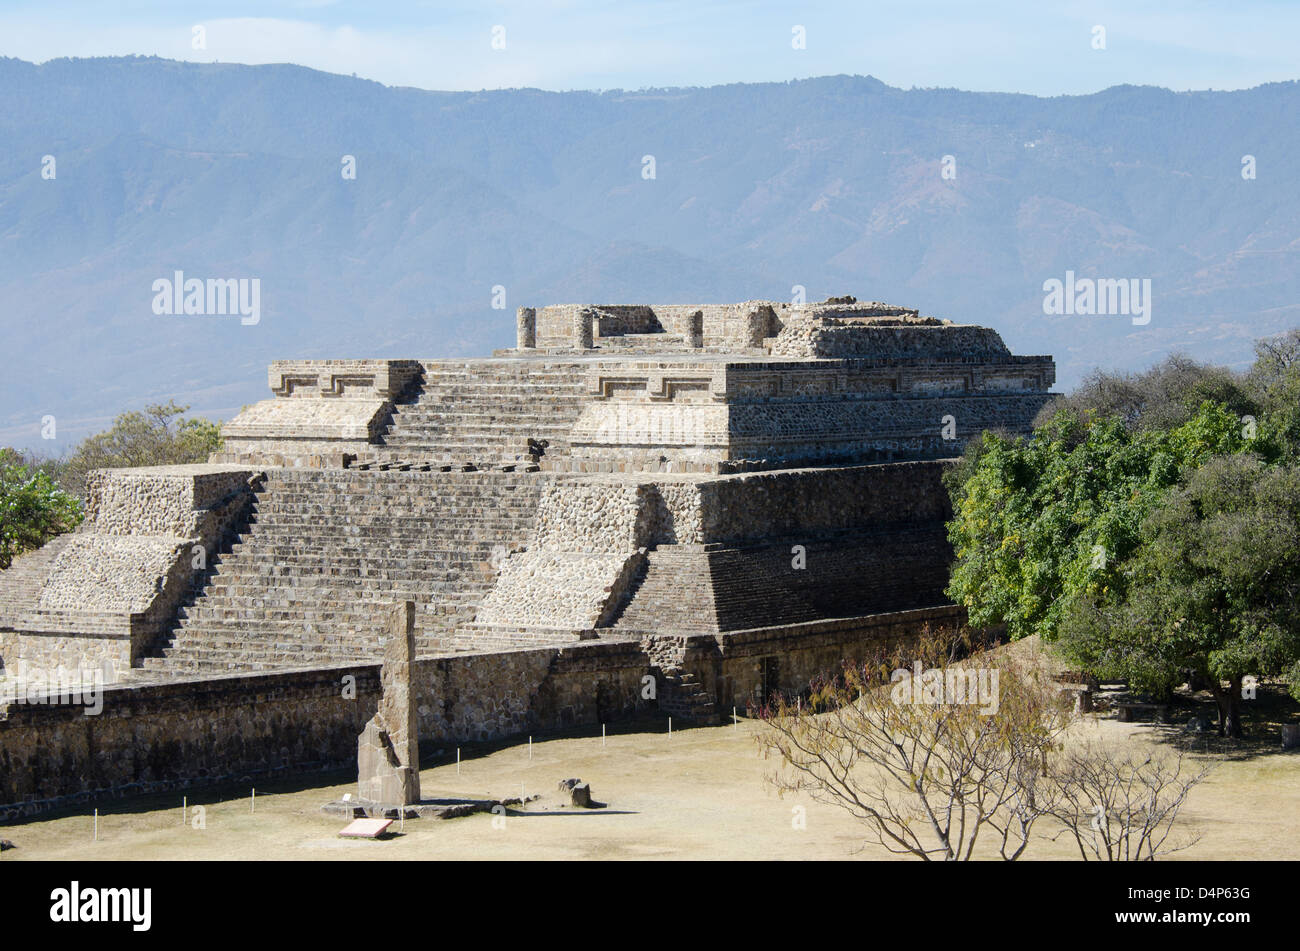 The ruined temple complex called 'Building IV' at Monte Alban, Oaxaca, Mexico. Stock Photo